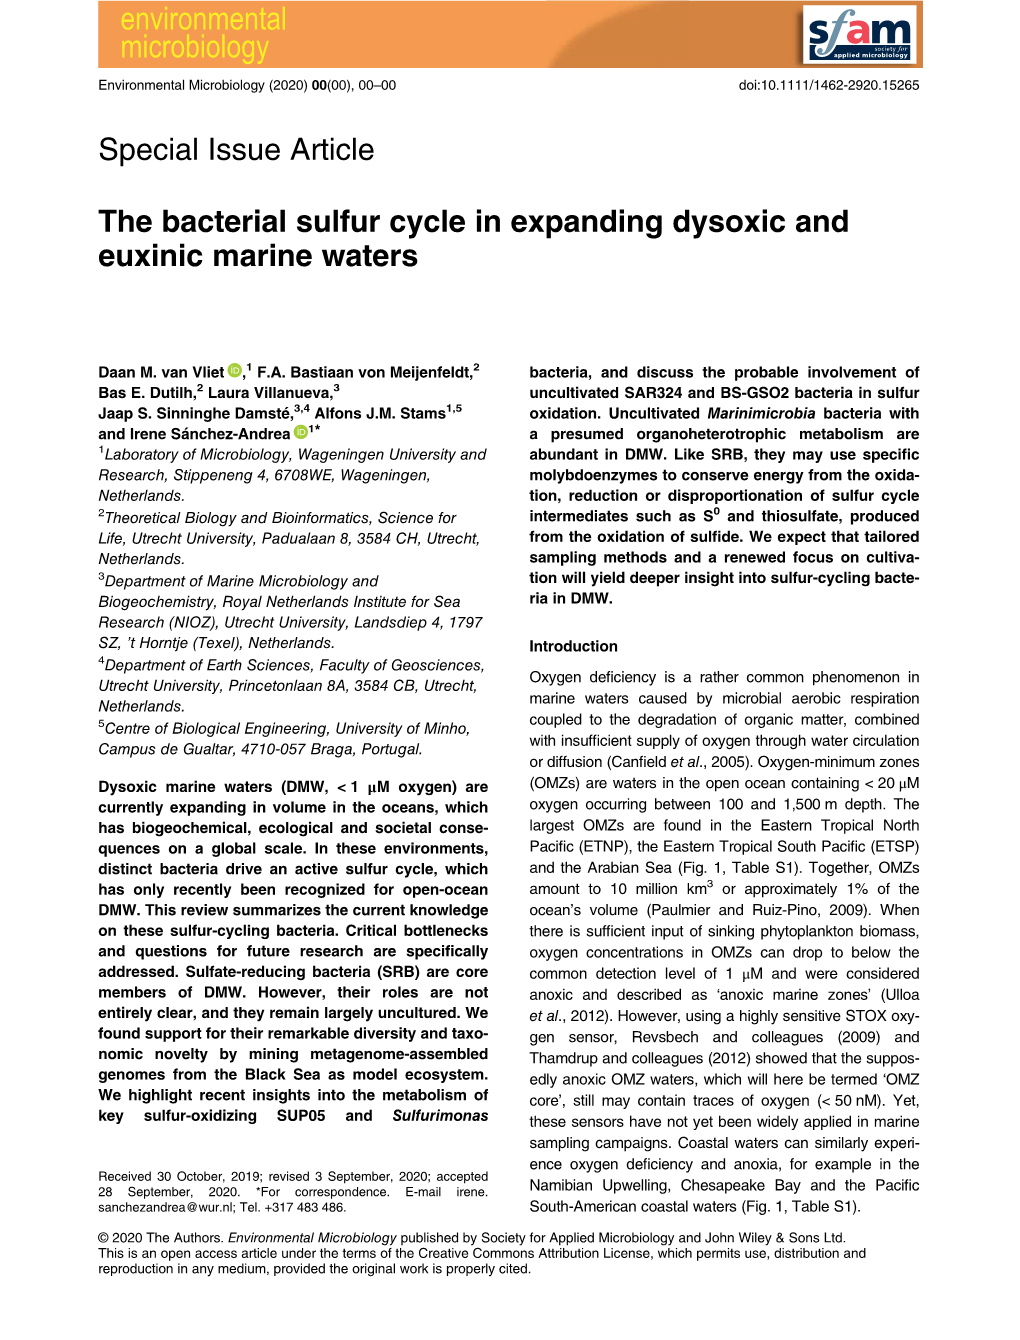 The Bacterial Sulfur Cycle in Expanding Dysoxic and Euxinic Marine Waters